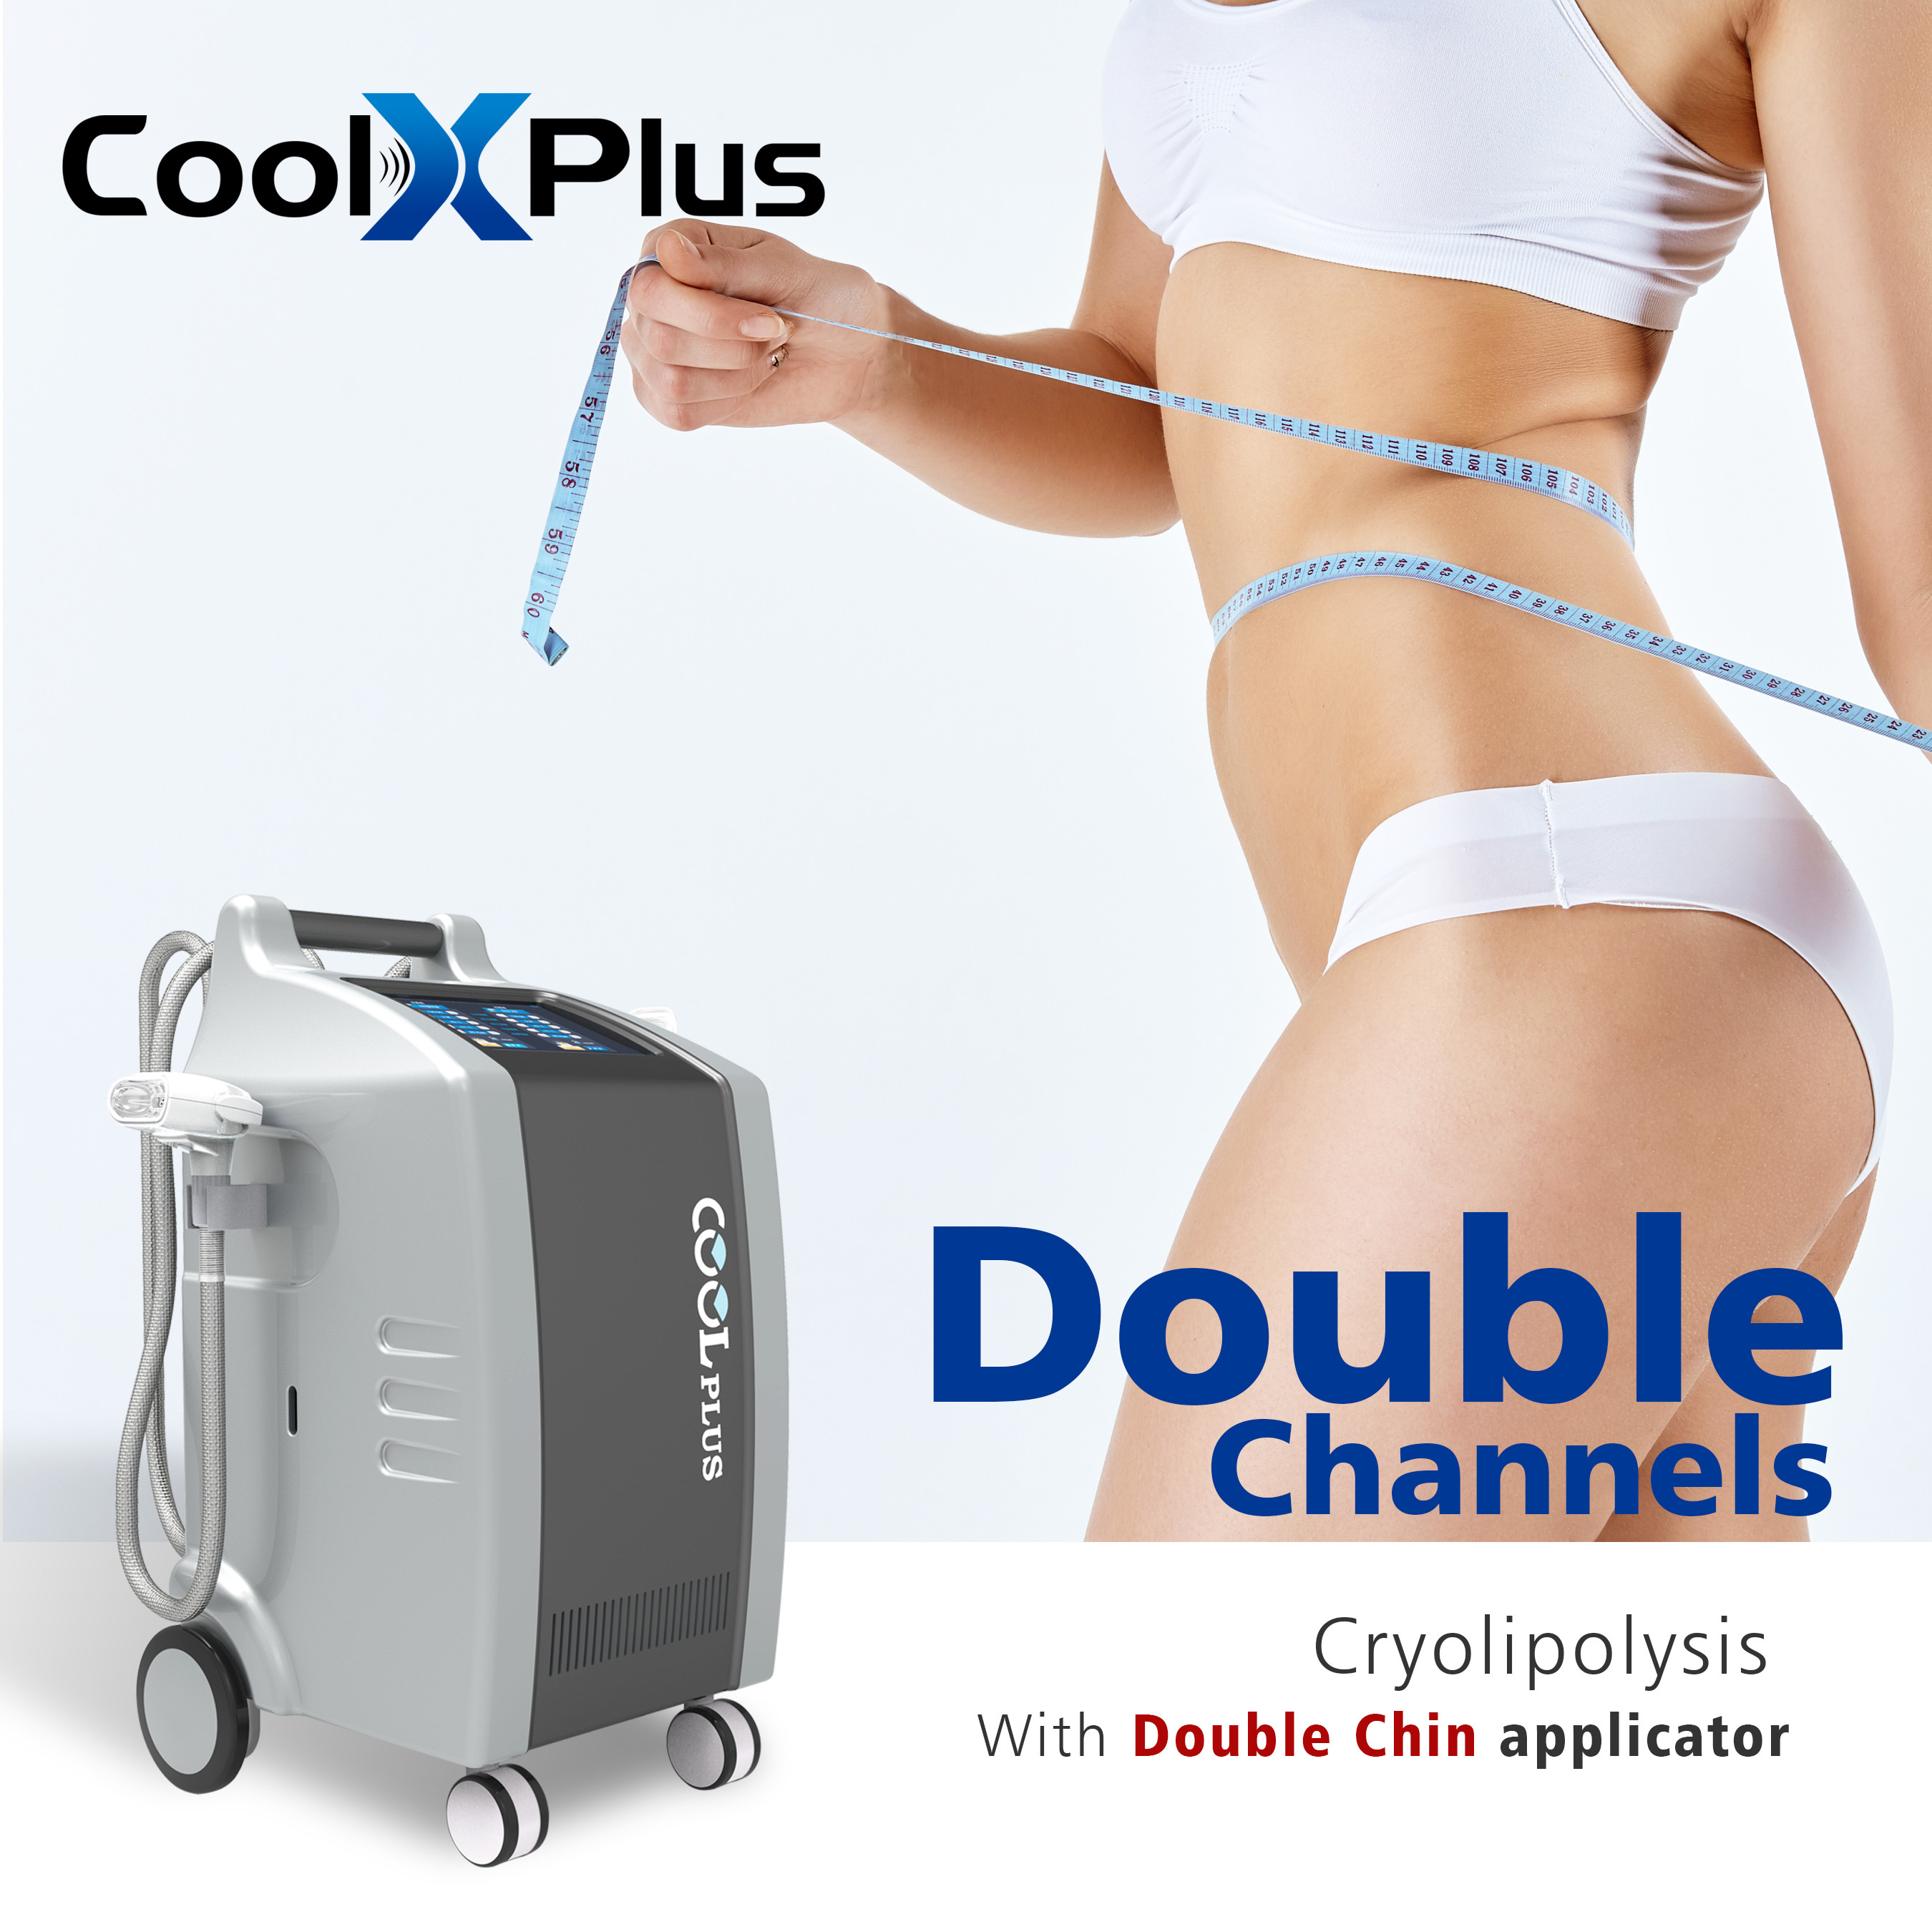 Double Channel cryolipolysis machine 4 handles Lipo Suction Cryo Freeze Fat Loss weight Vacuum Slimming Beauty equipment